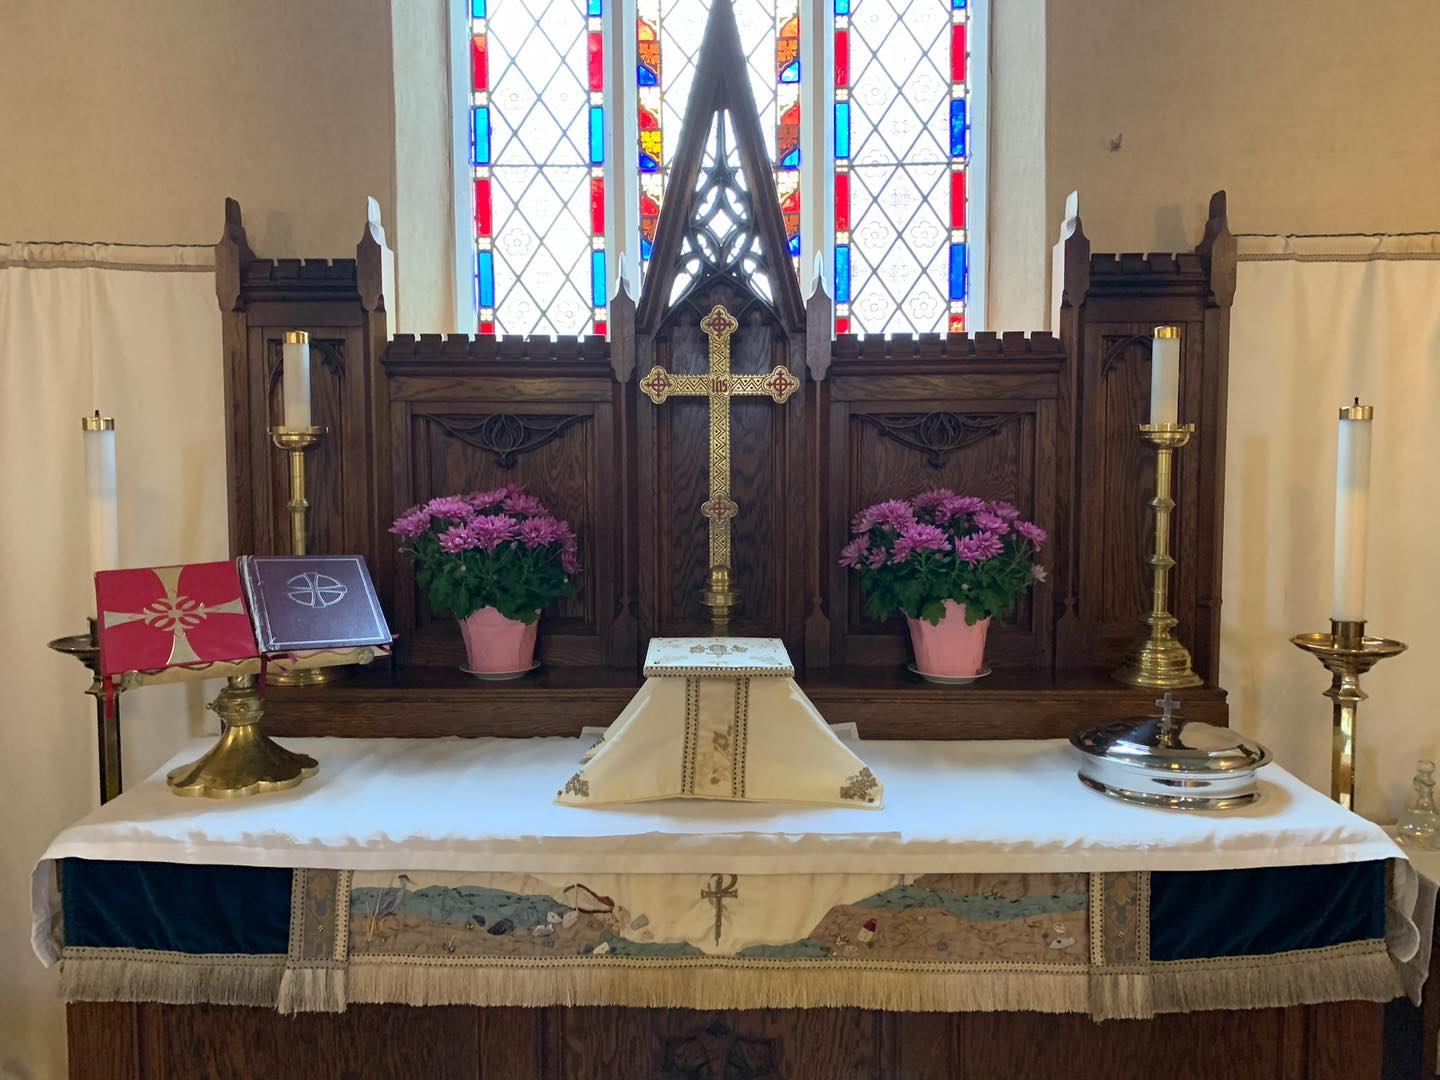 Easter Sunday, April 9th, at St. Luke's and St. Mark's